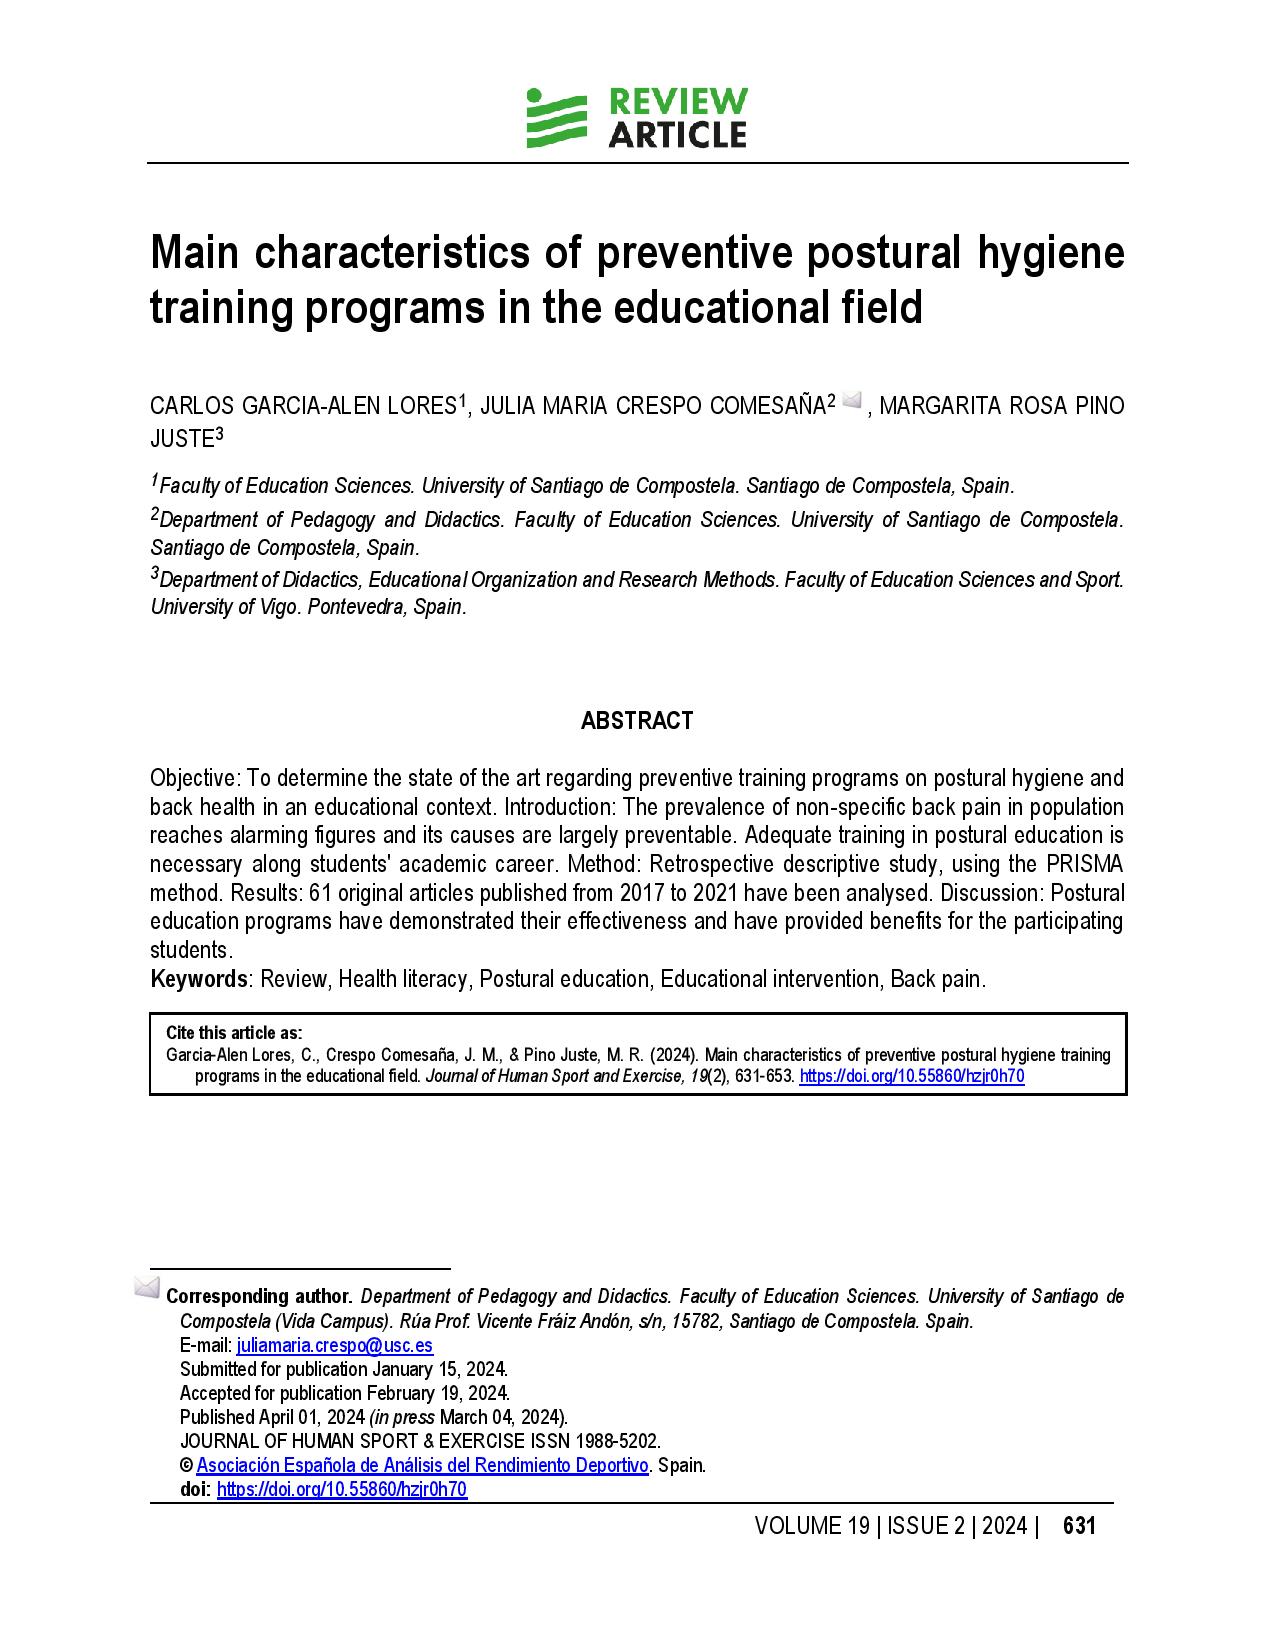 Main characteristics of preventive postural hygiene training programs in the educational field